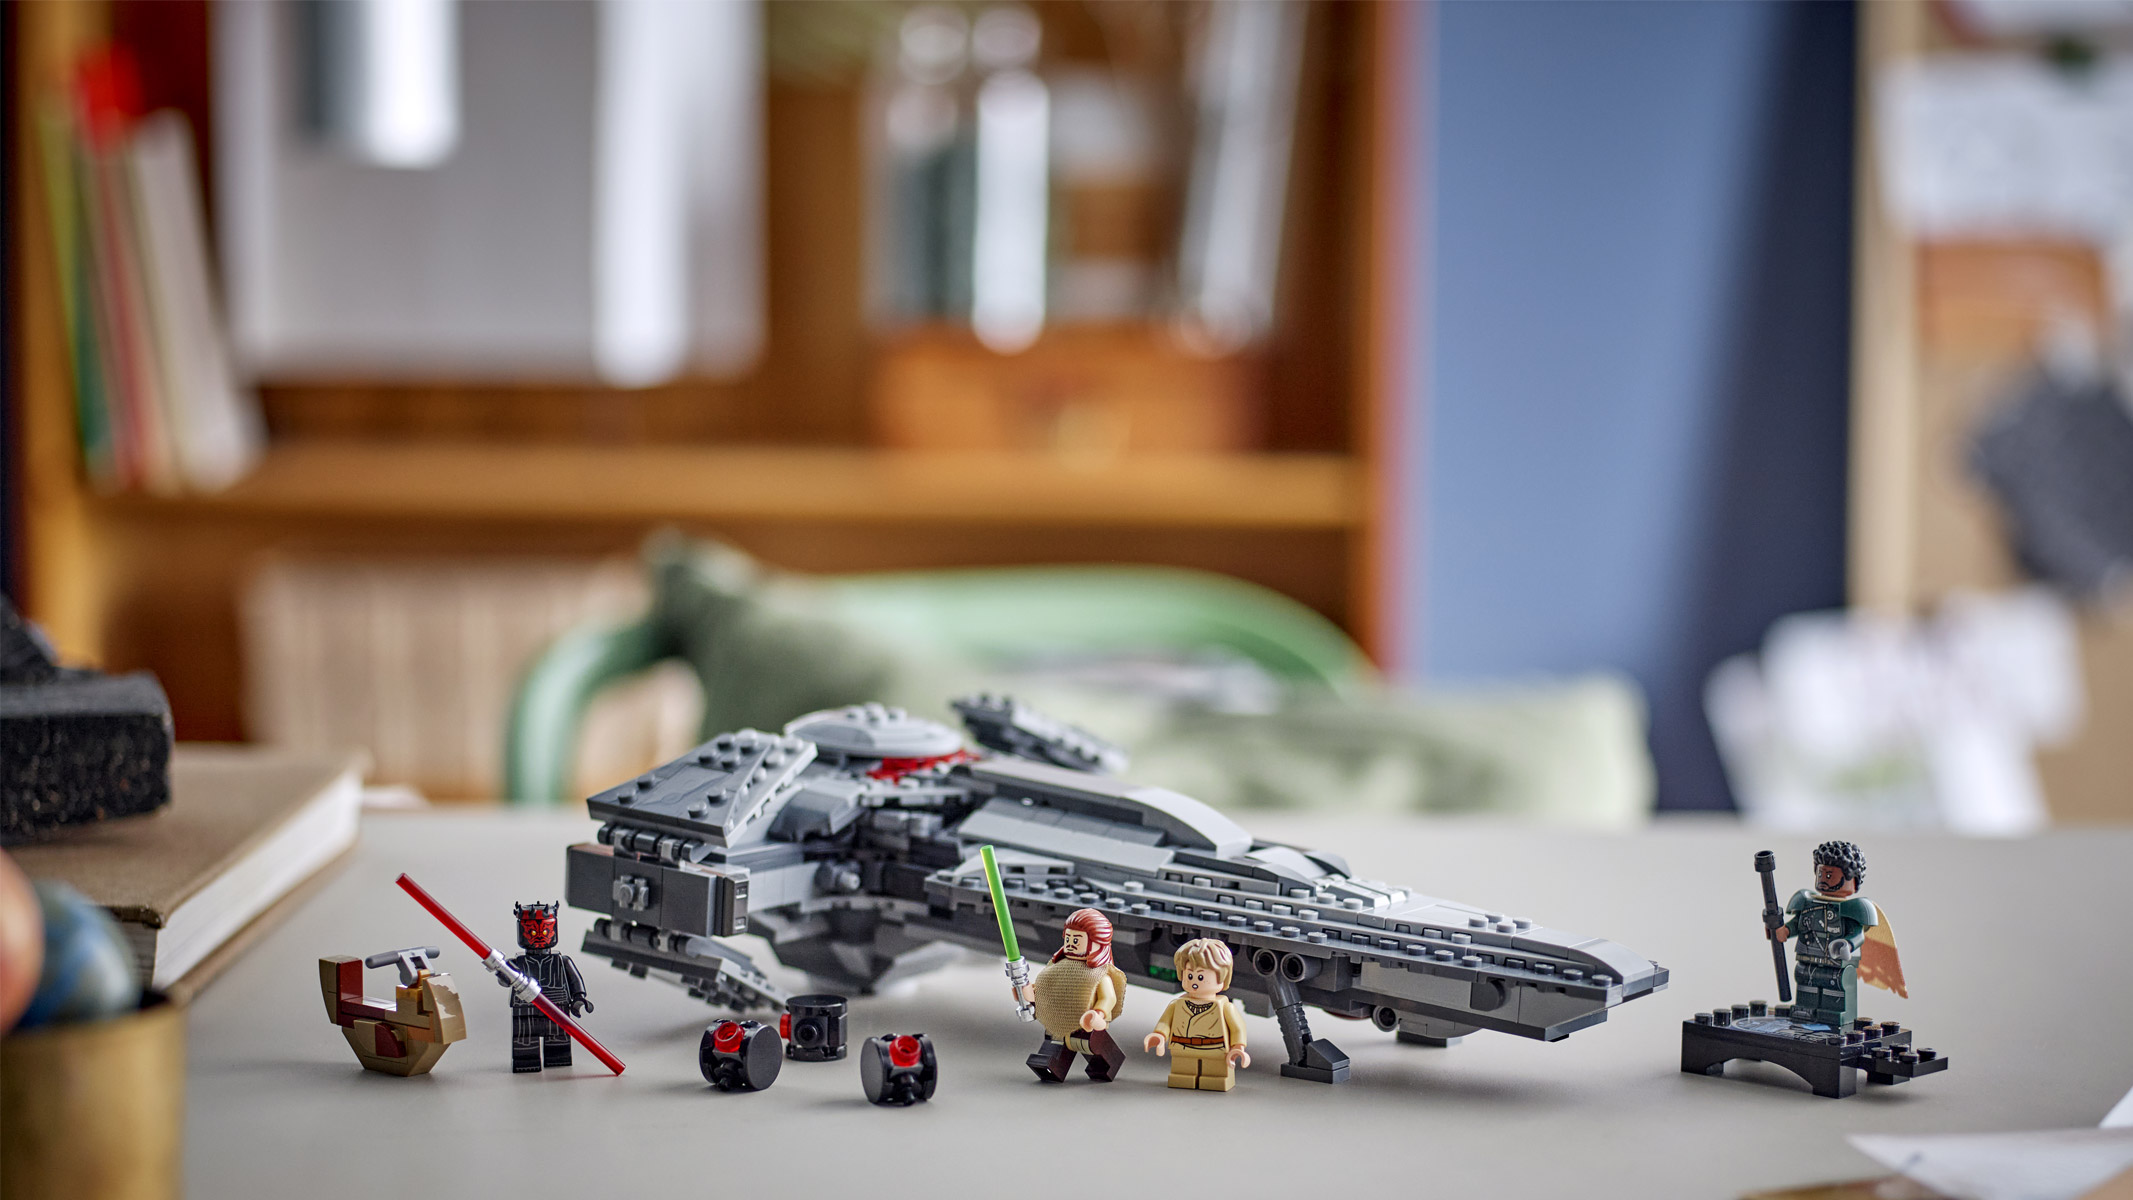 lego releases 7 new star wars sets ahead of 'star wars day' on may 4